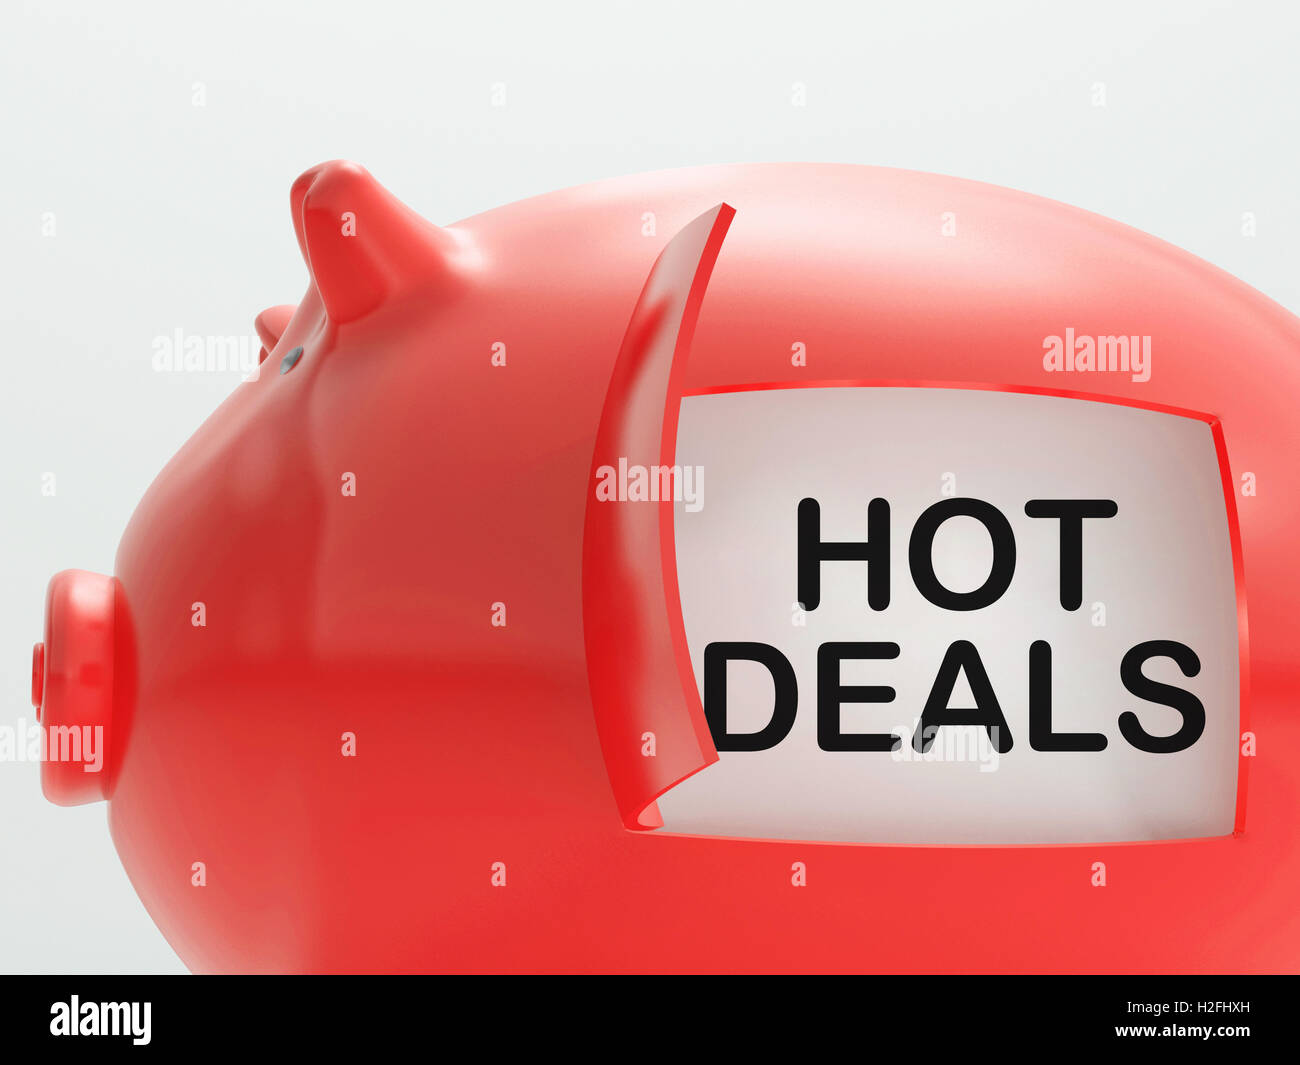 Hot Deals Piggy Bank Shows Cheap And Quality Products Stock Photo